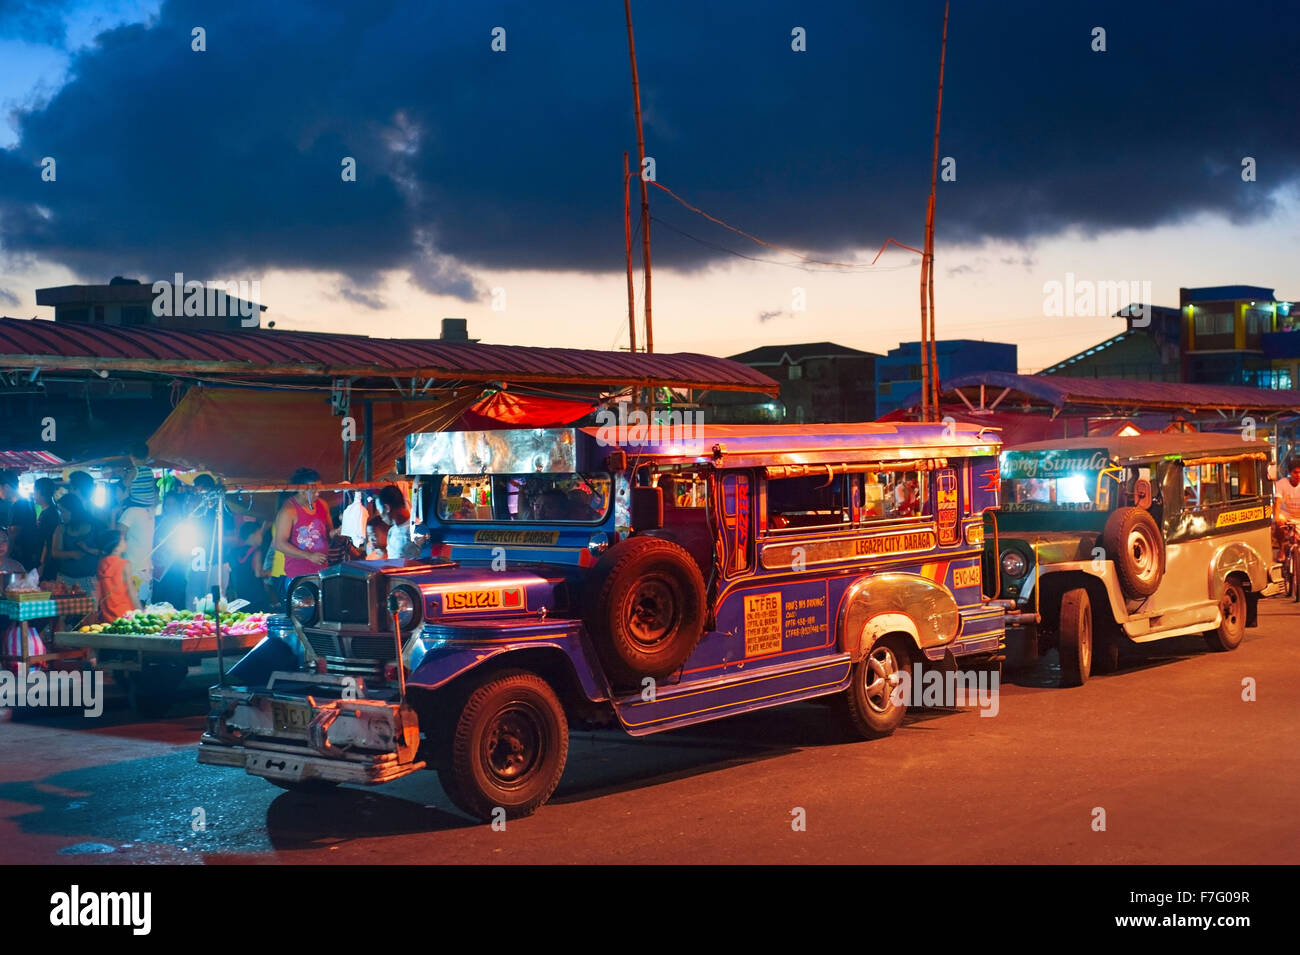 Jeepneys waiting for passengers on the street. Jeepneys are public transport. Stock Photo